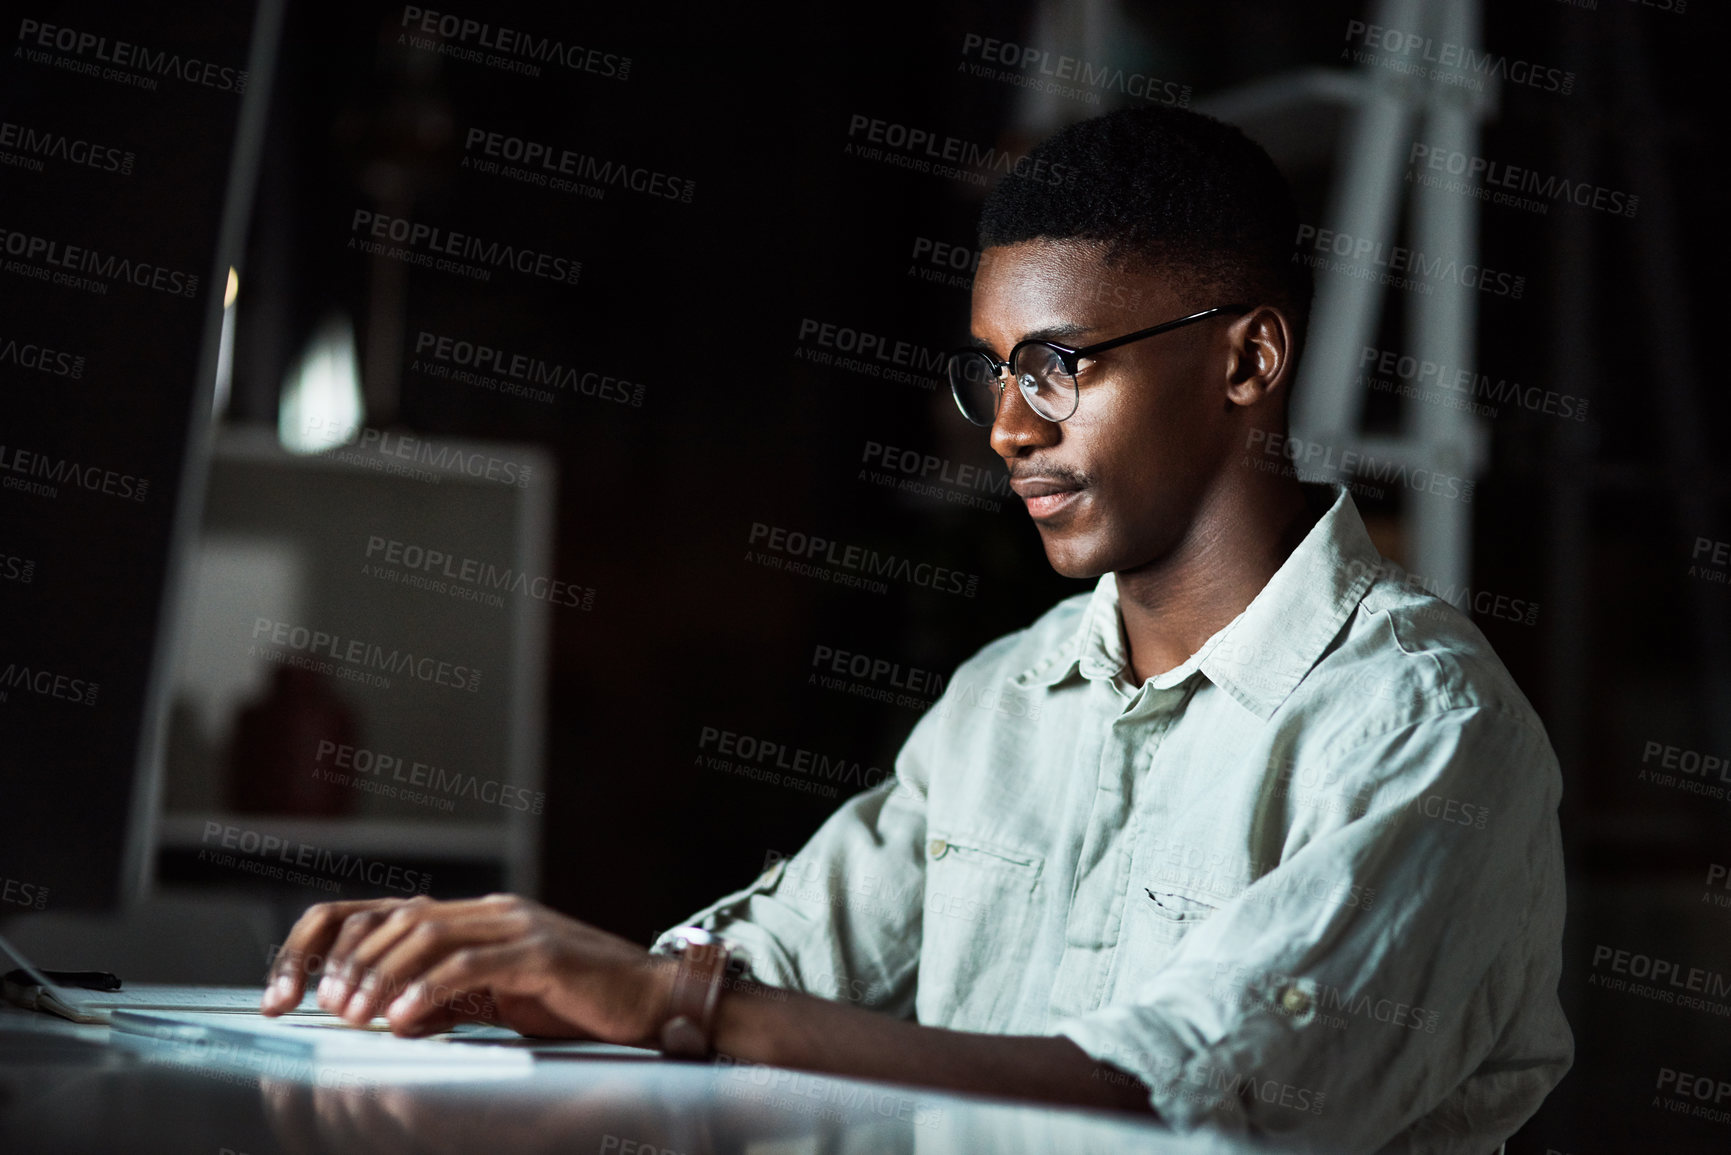 Buy stock photo Cropped shot of a business man using his computer while working late at the office